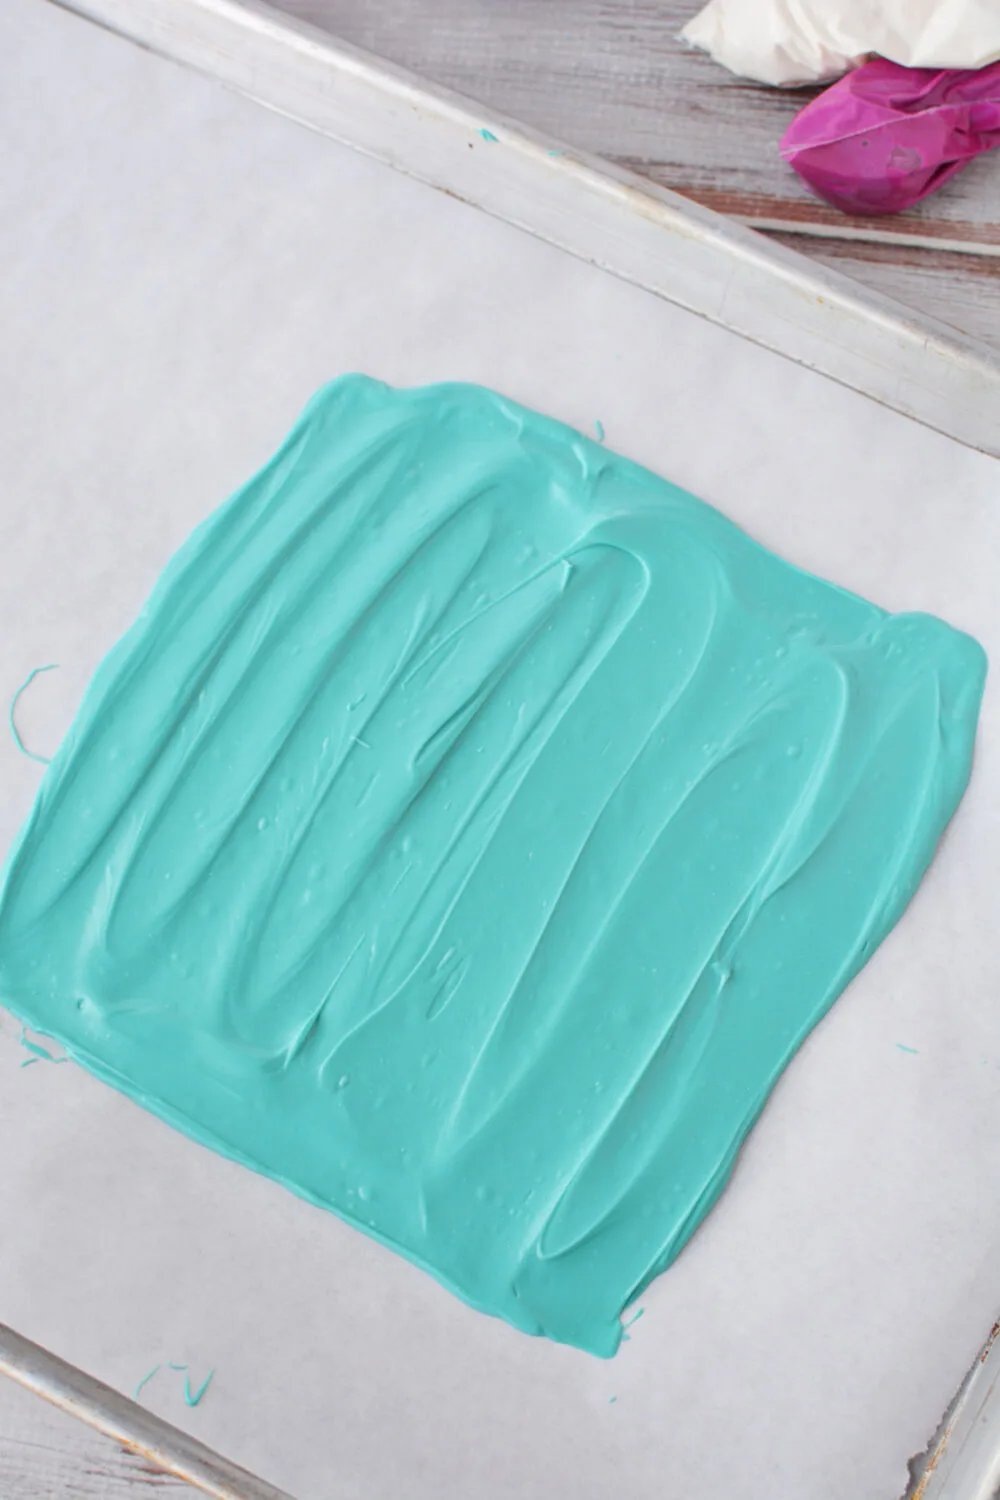 Melted turquoise candy melts on a baking sheet. 